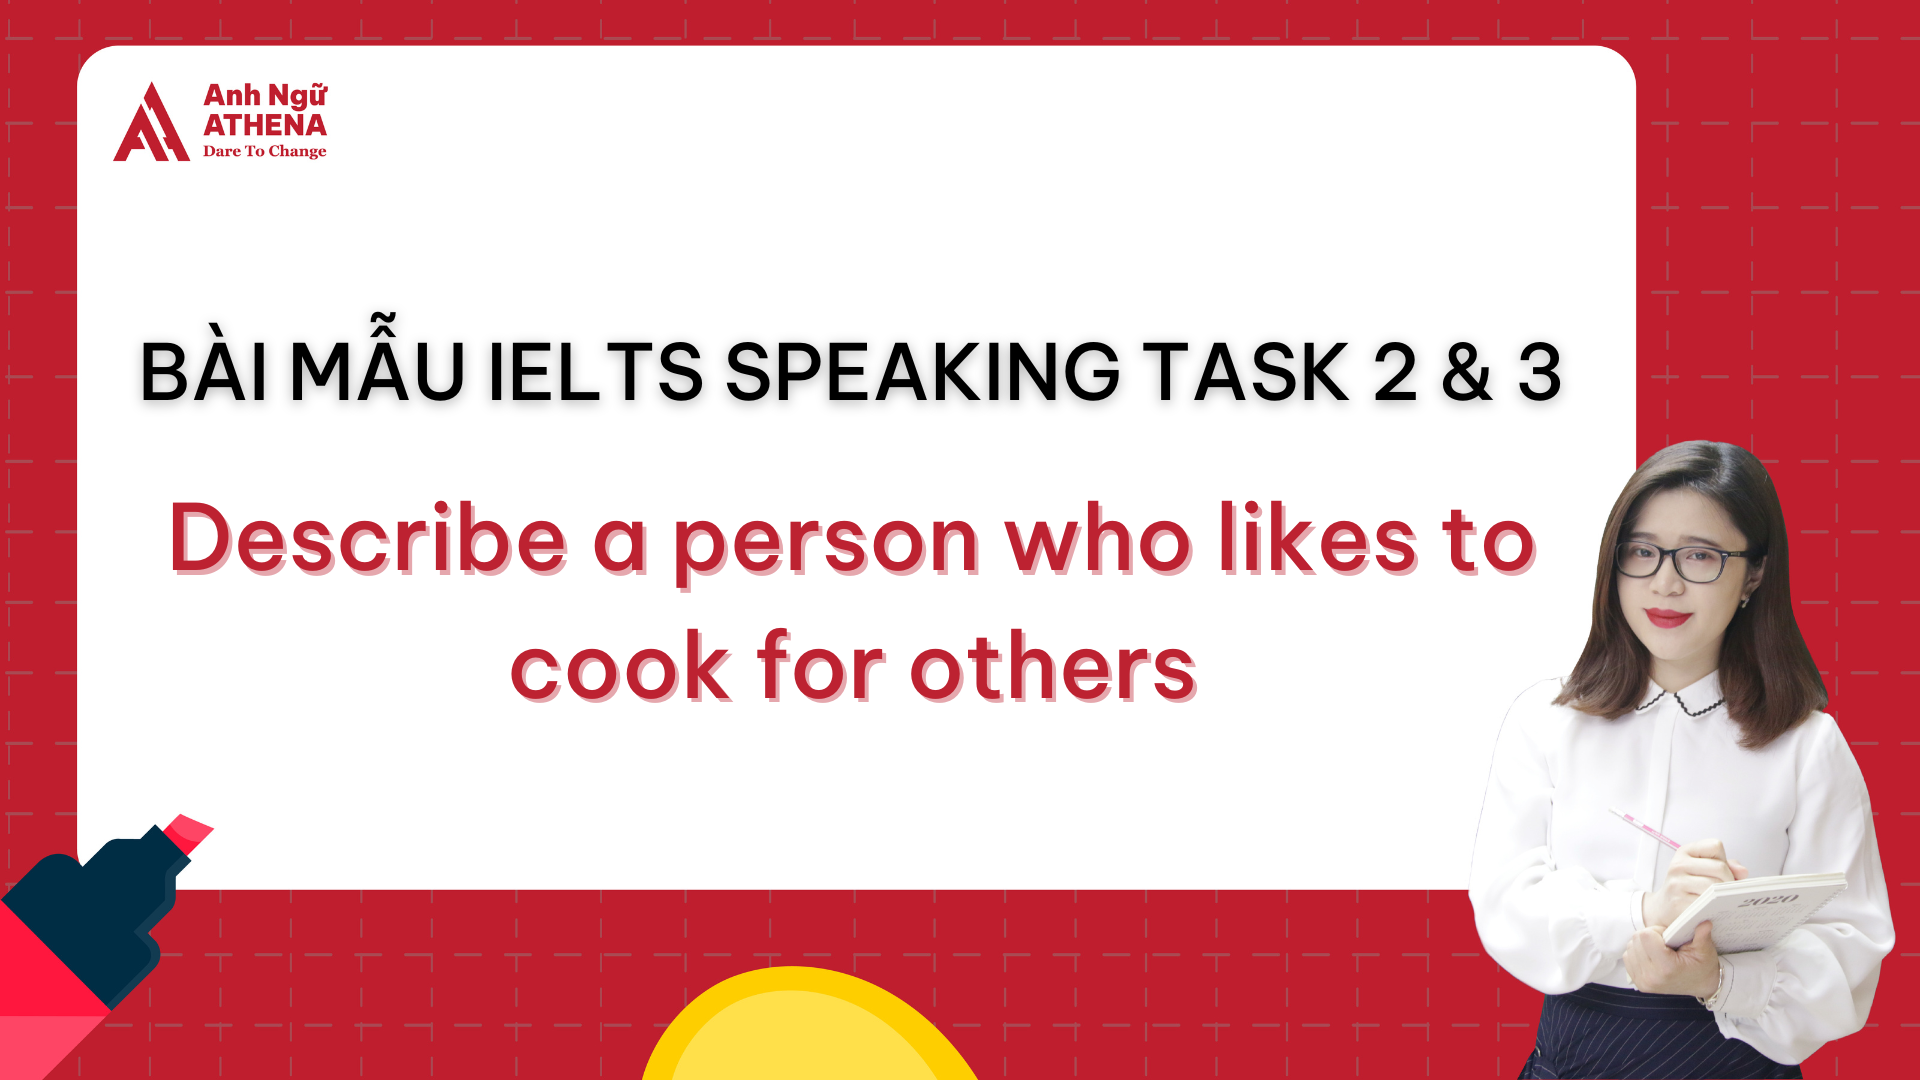 Bài mẫu IELTS Speaking Part 2: “Describe a person who likes to cook for others"